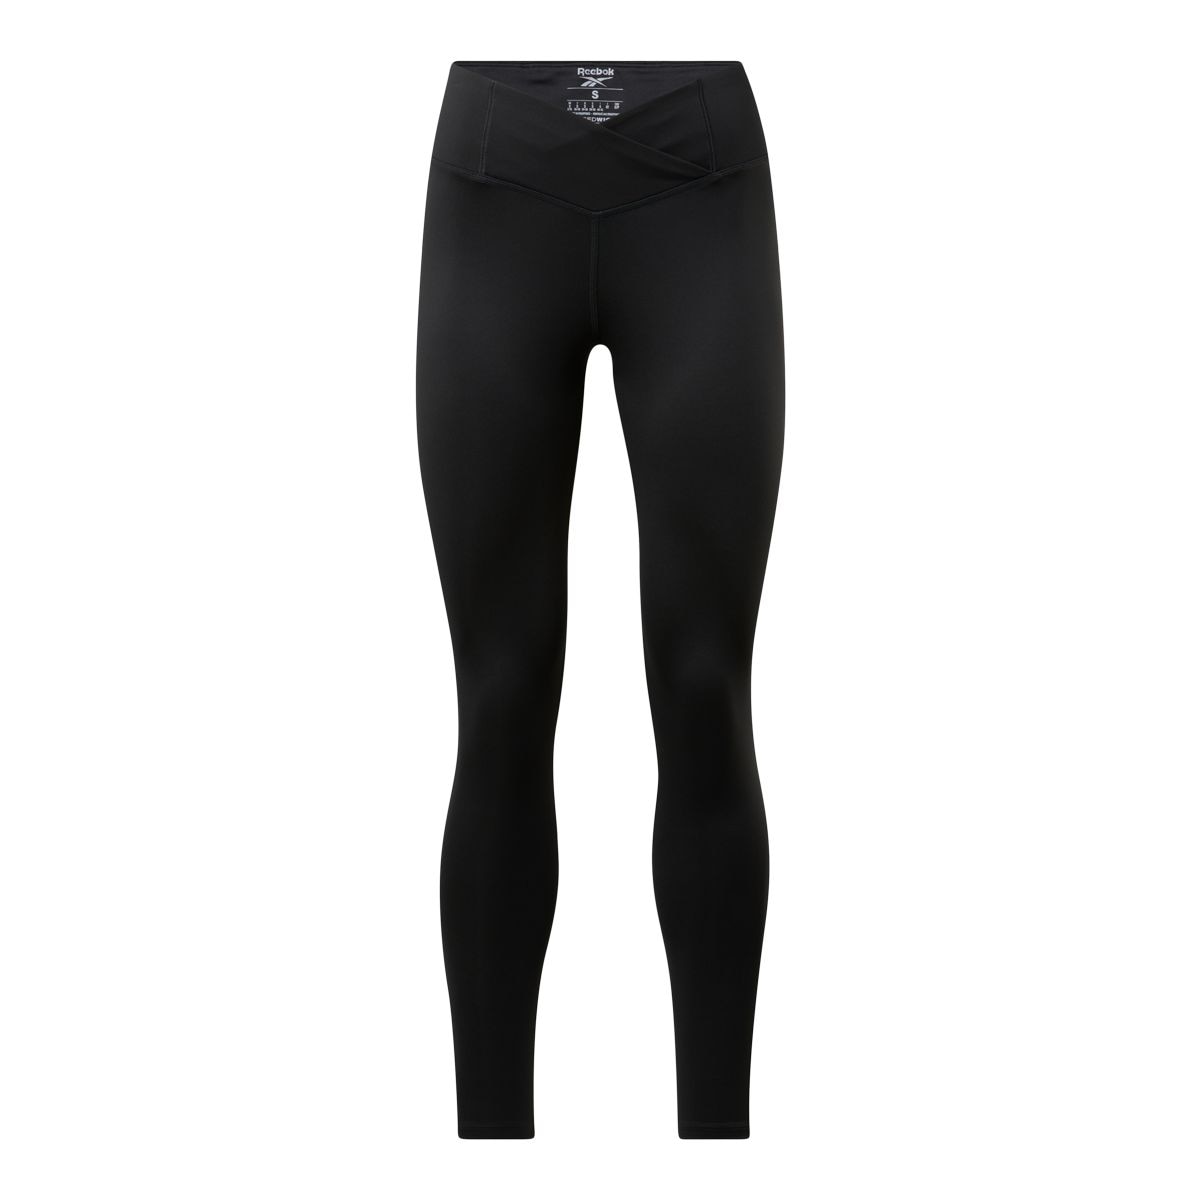 https://media-www.sportchek.ca/product/div-03-softgoods/dpt-70-athletic-clothing/sdpt-02-womens/334008344/reebok-w-wor-basic-25in-tight-8b859363-ba70-468a-8d97-033e13124a98-jpgrendition.jpg